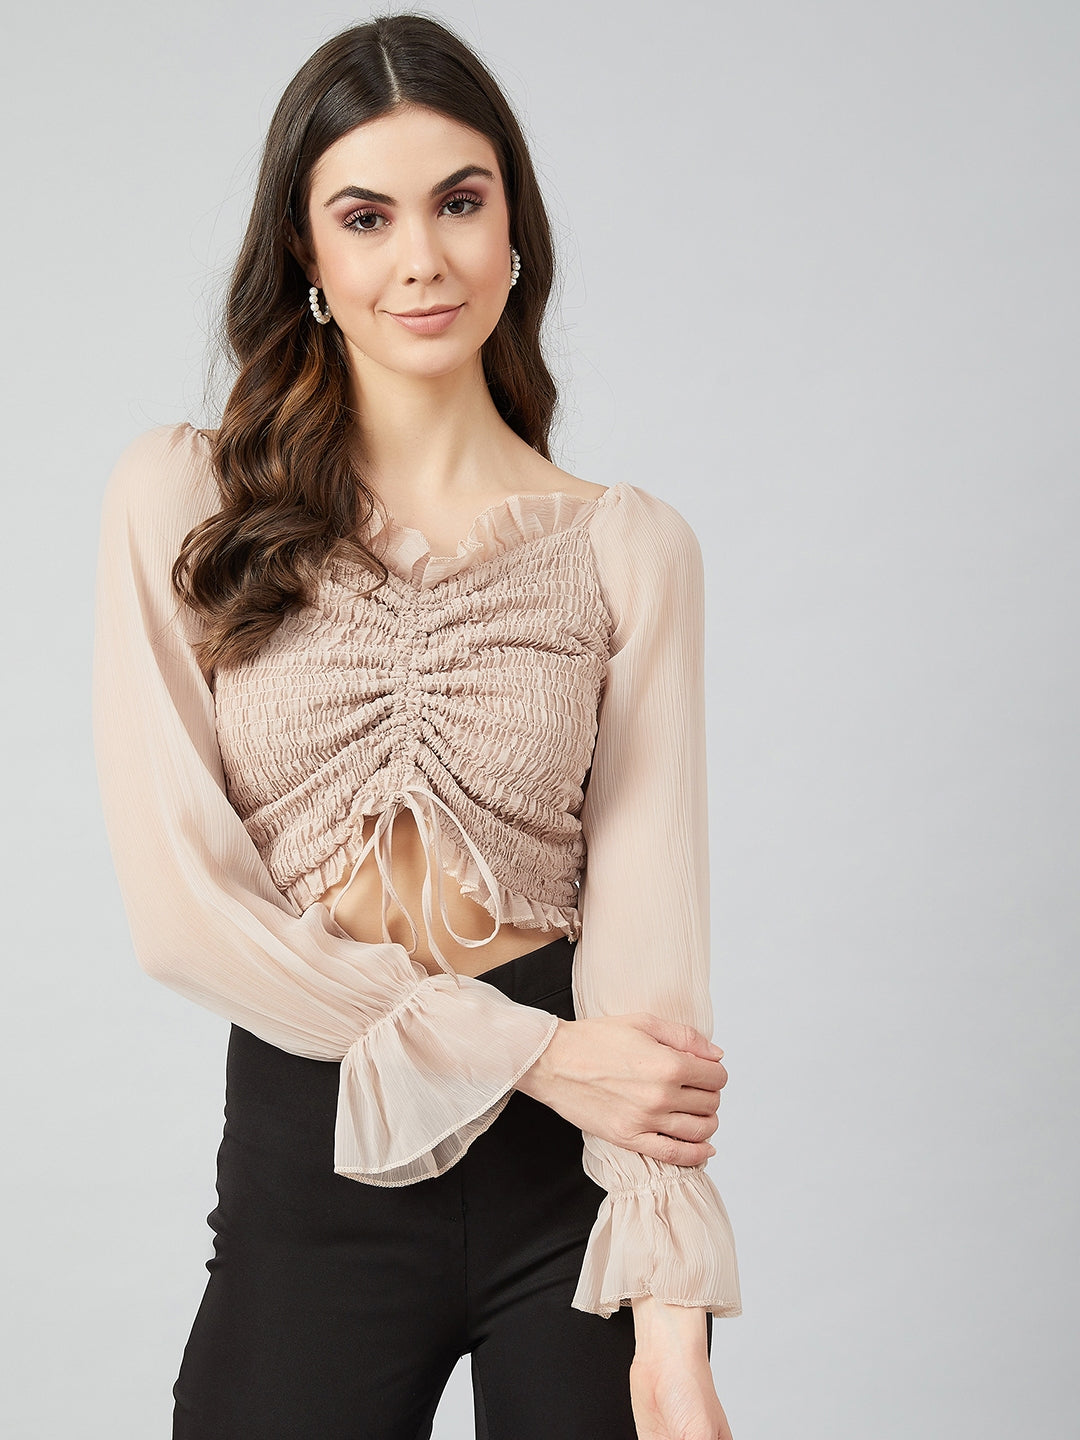 Athena Beige Puff Sleeves Smocked Chiffon Fitted Crop Top - Athena Lifestyle